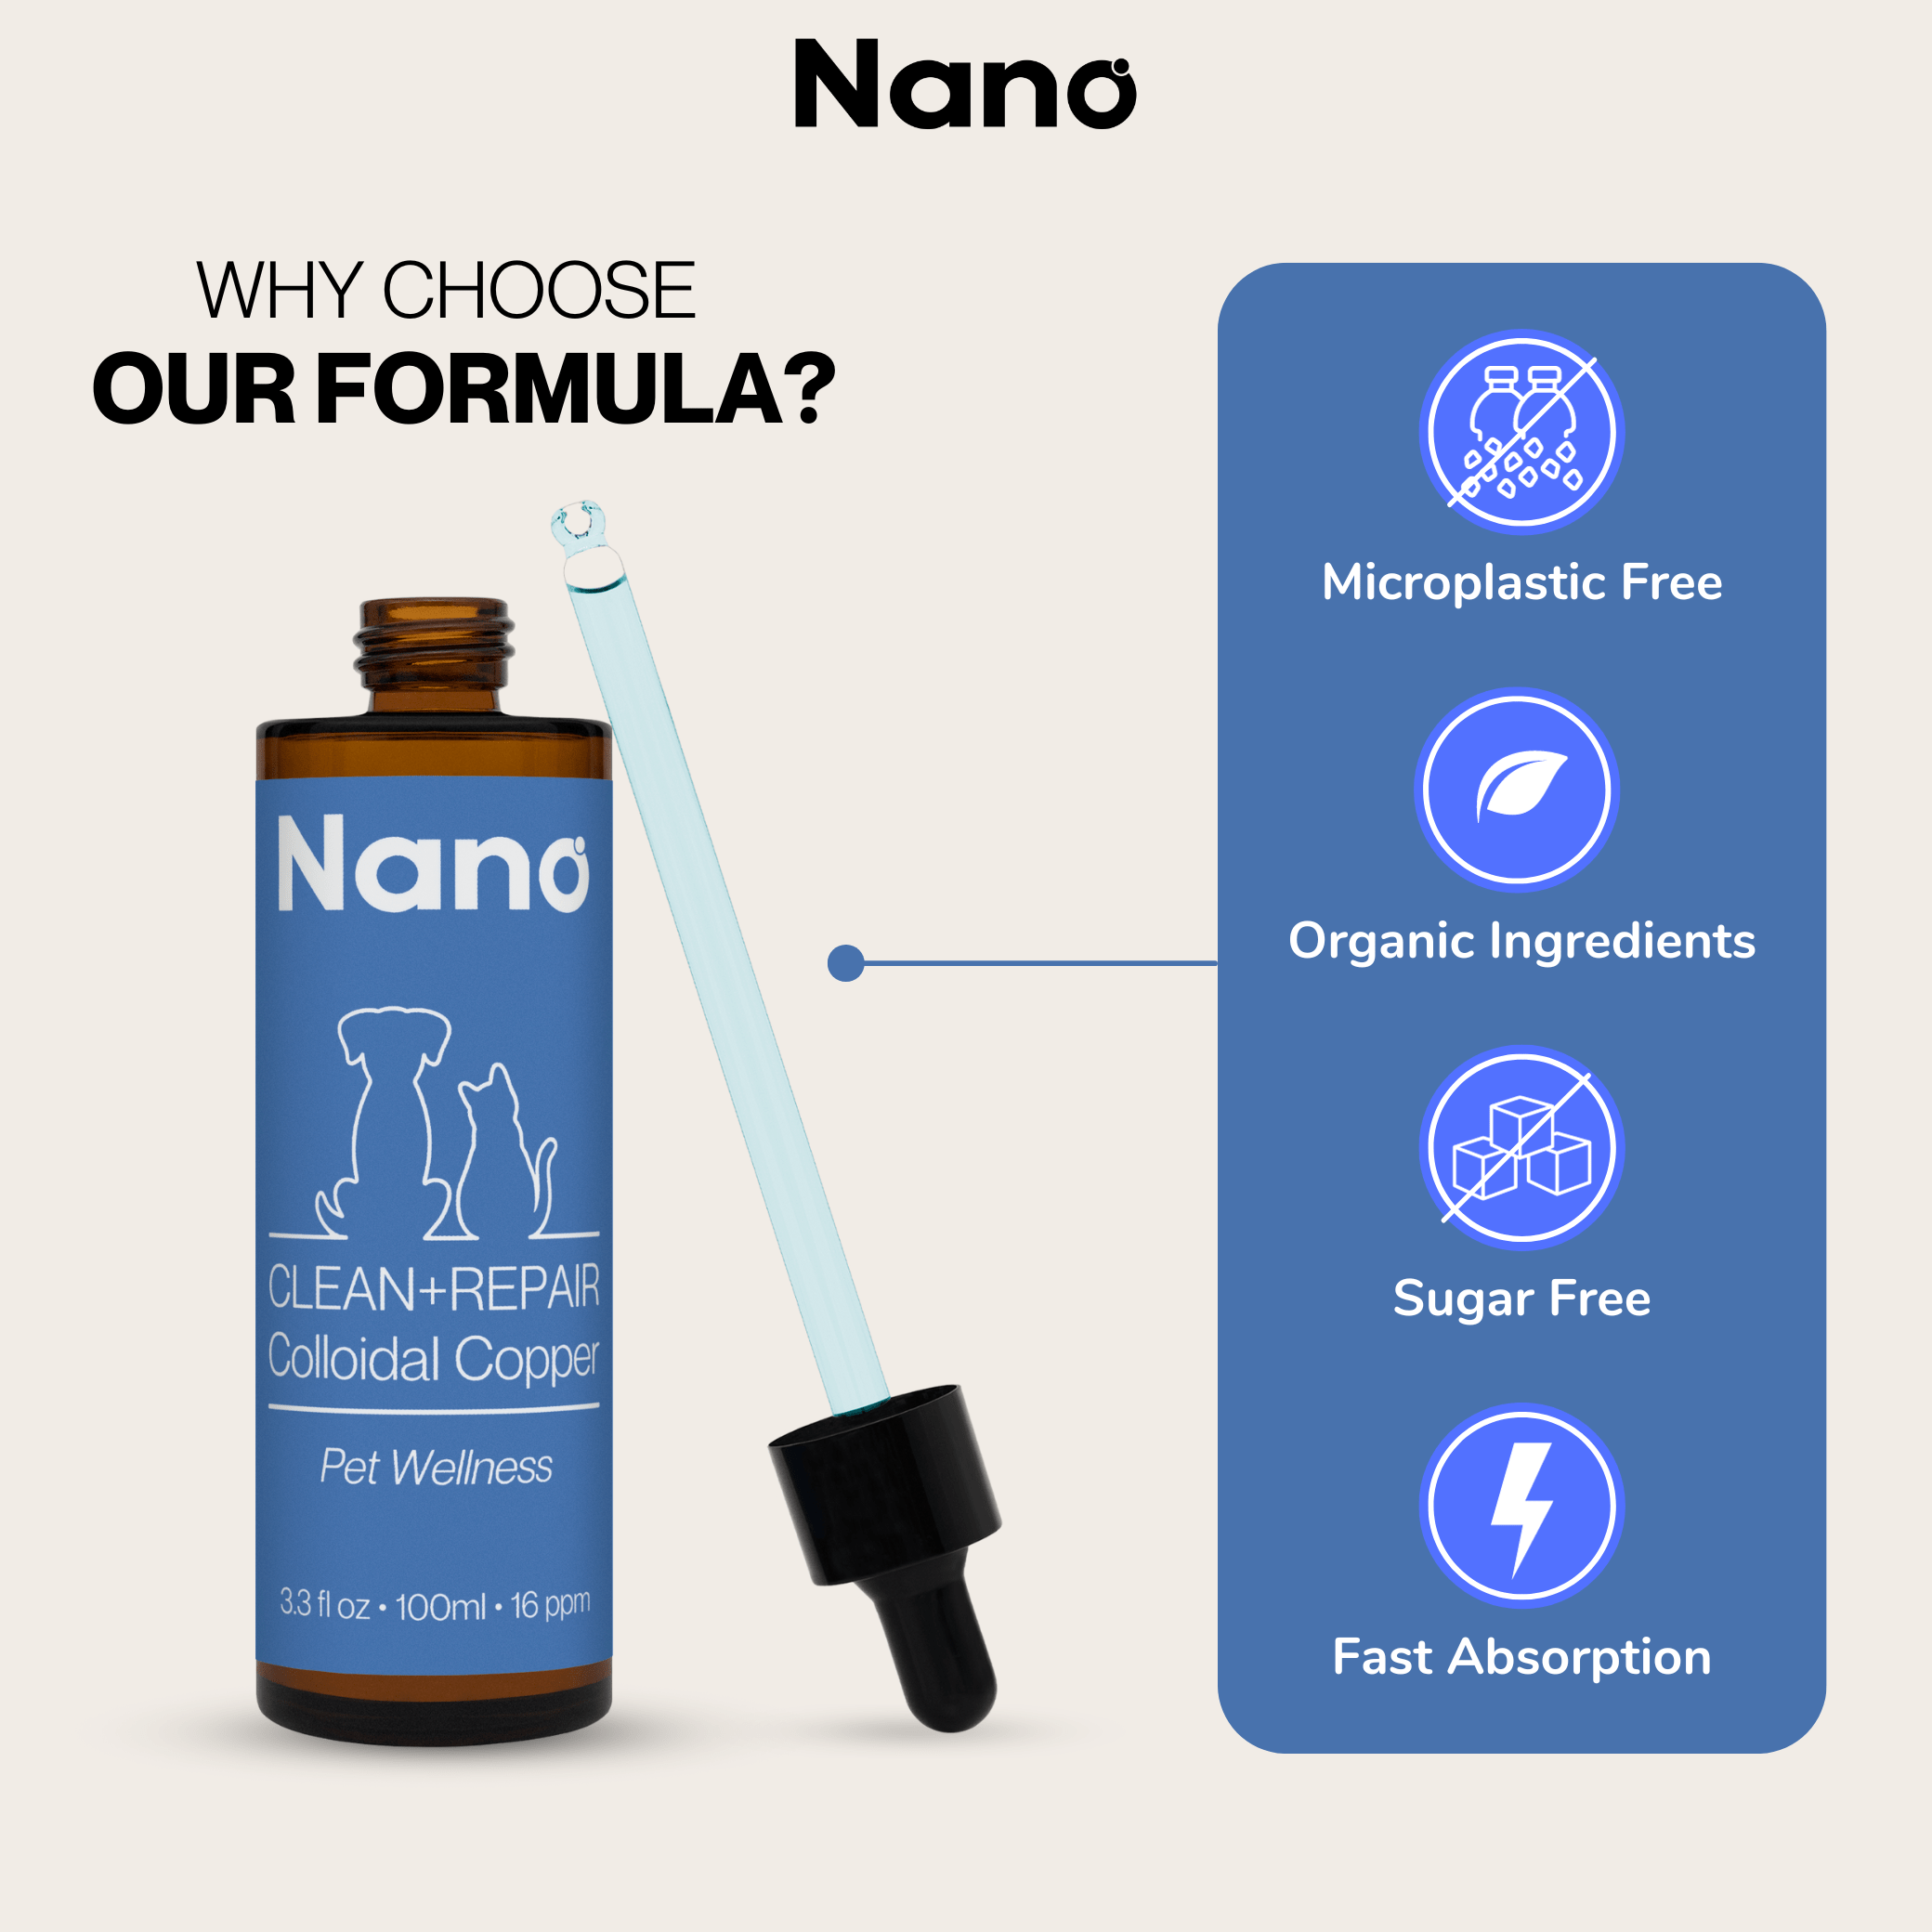 Nano clean and repair colloidal copper pet wellness supplement is micro plastic free, organic, sugar free, and highly bioavailable